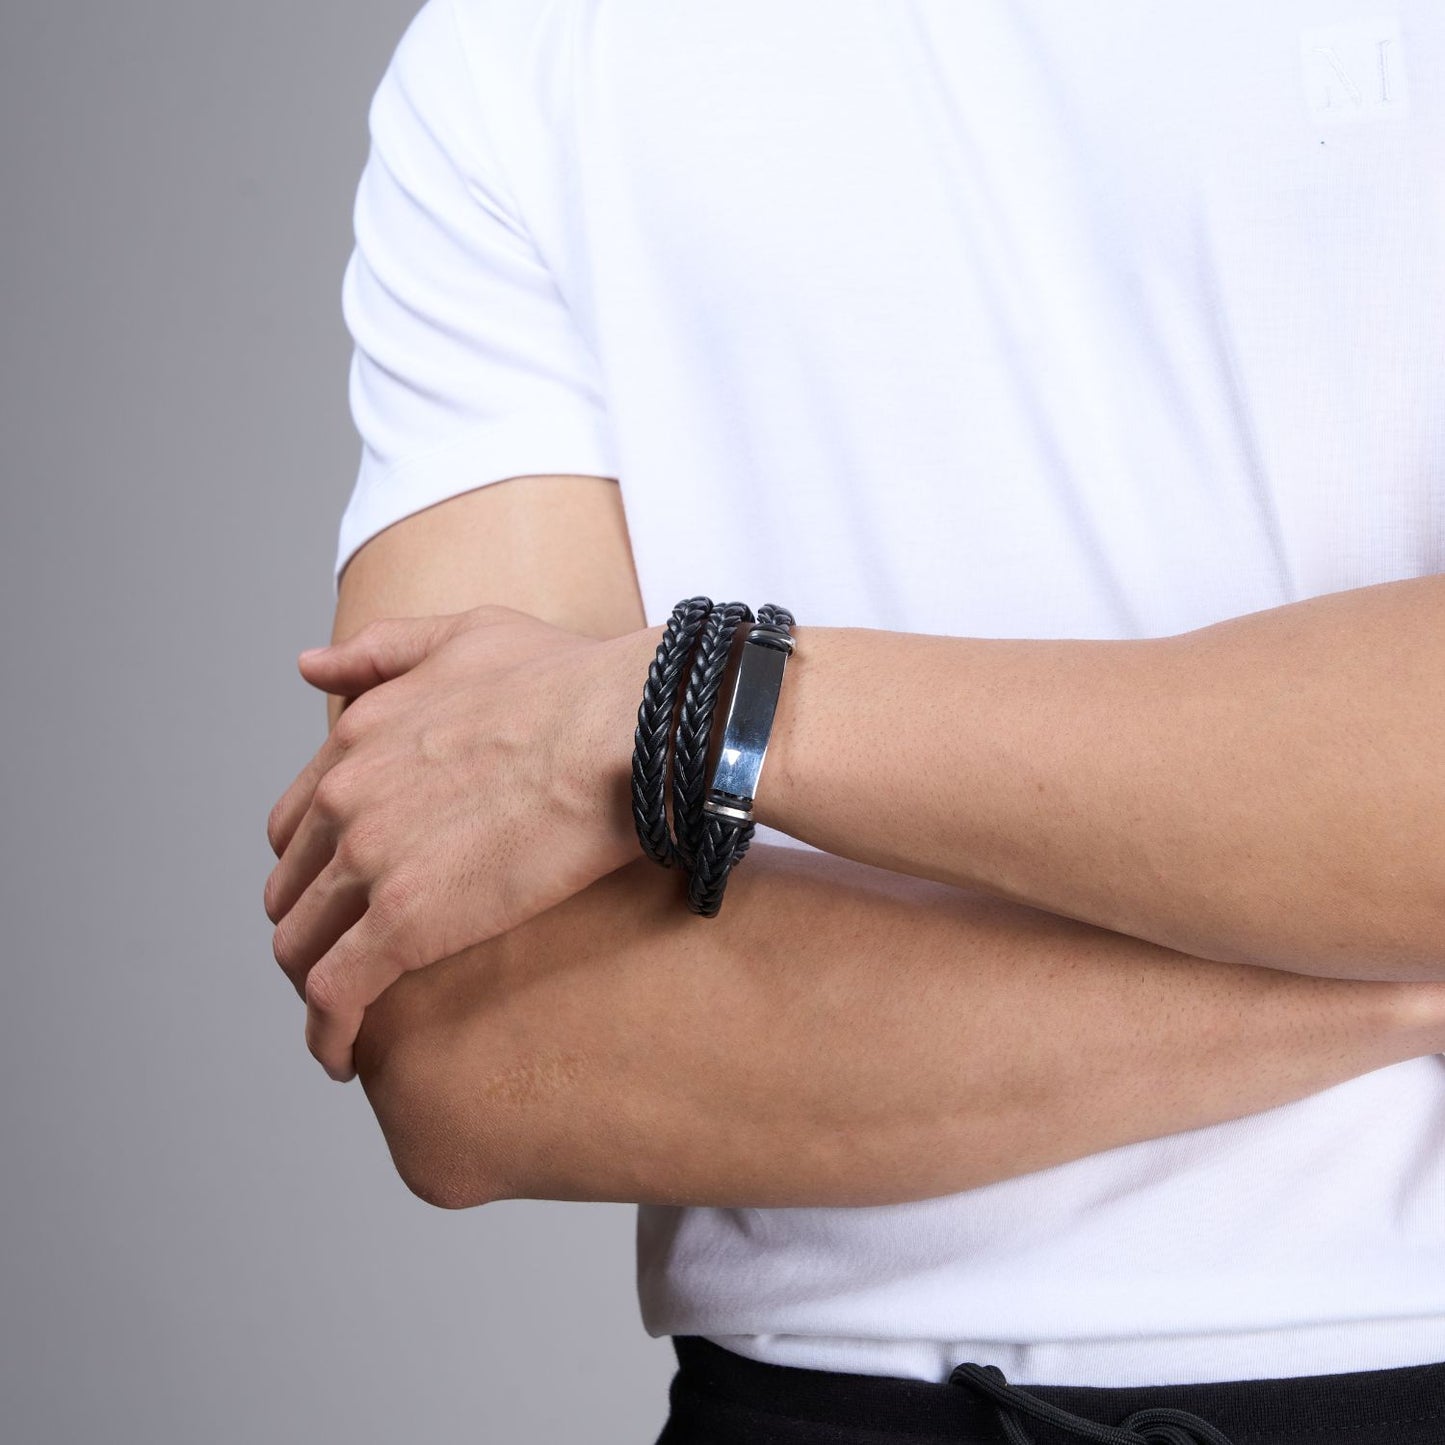 Black colored long Bracelet for men, with Buckle clasp.